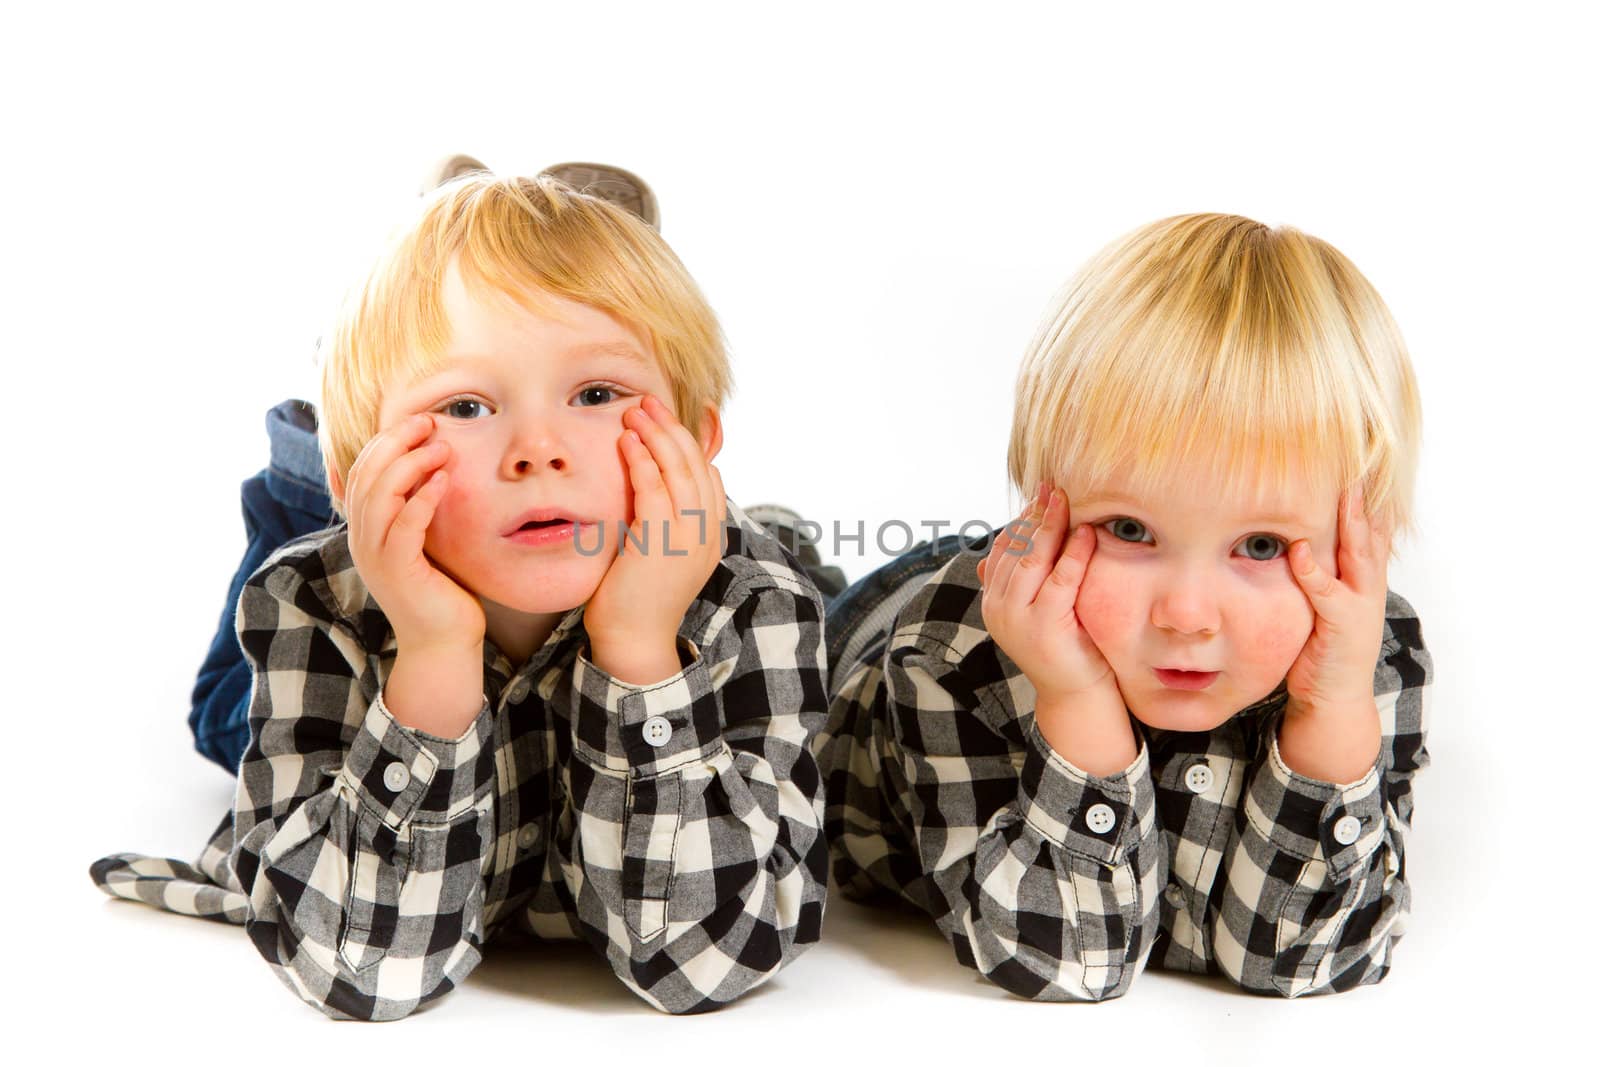 A boy and his sibling brother pose for this portrait in a studio against an isolated white background.